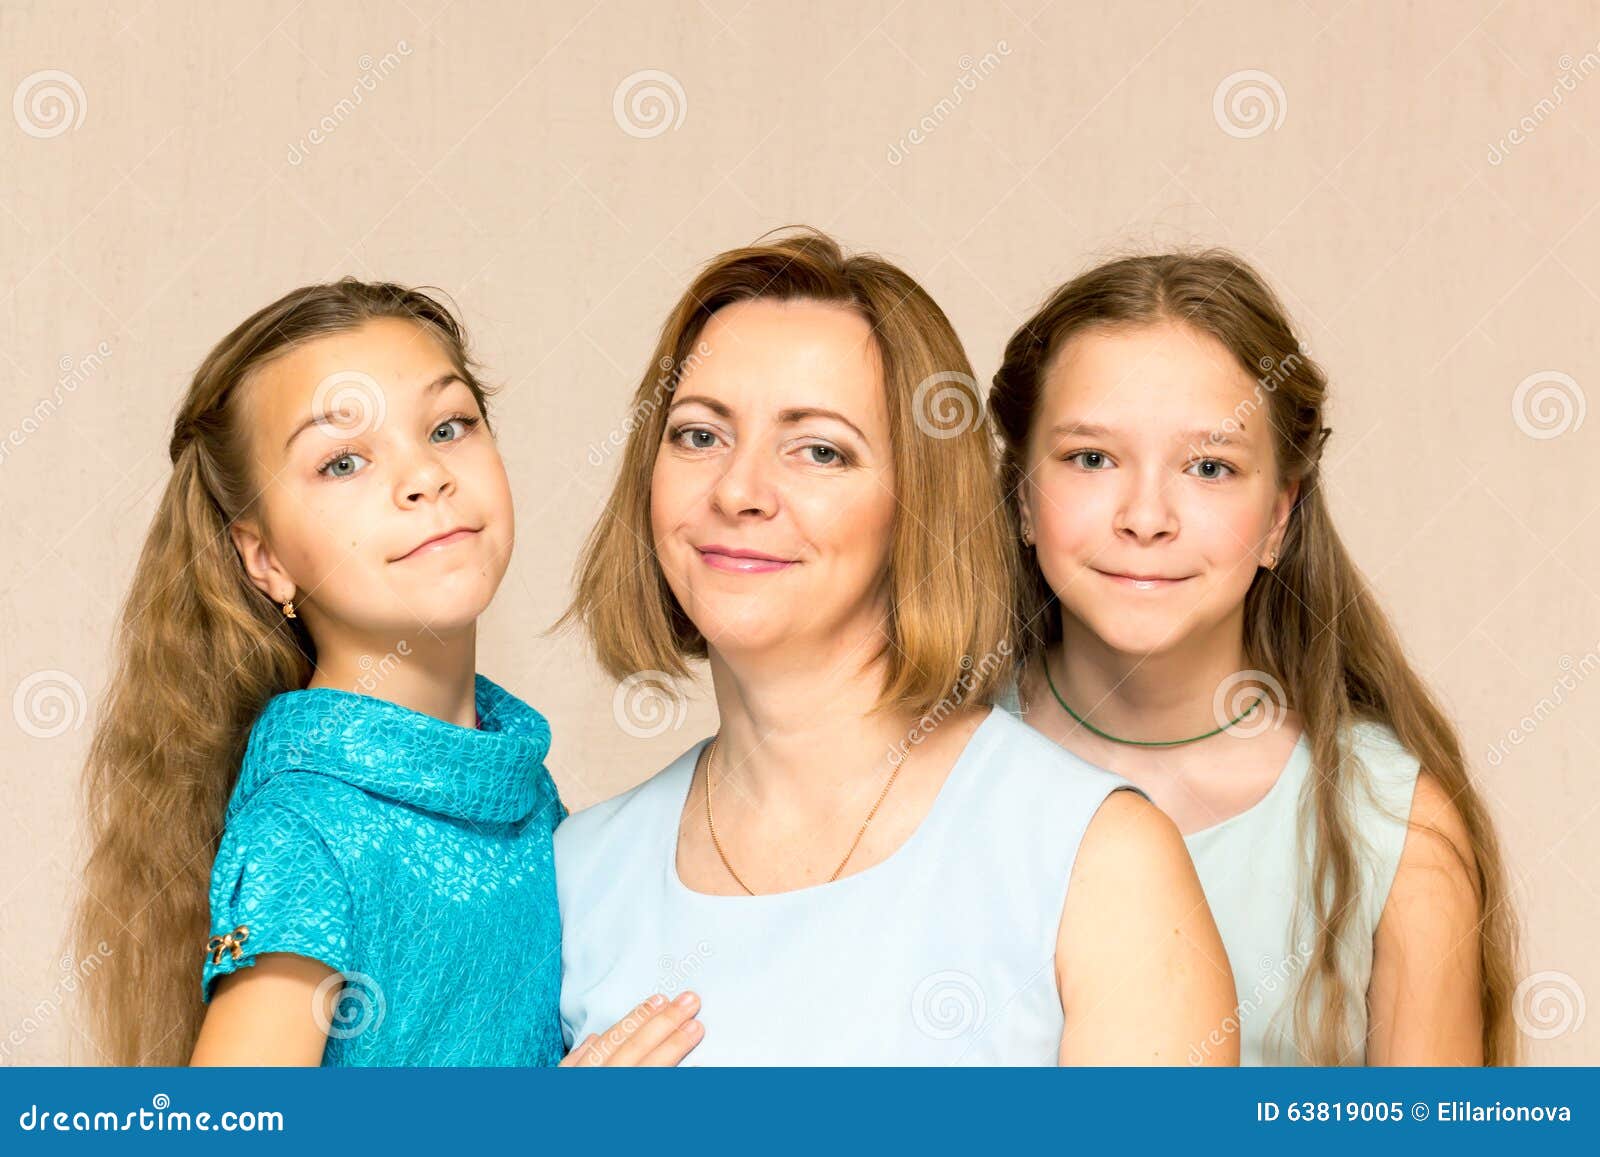 Mother and daughter family. Мама и 2 Дочки силуэт. Two daughters. Asian Middle-aged mother and daughter Group photo Hairdressing poster White background.